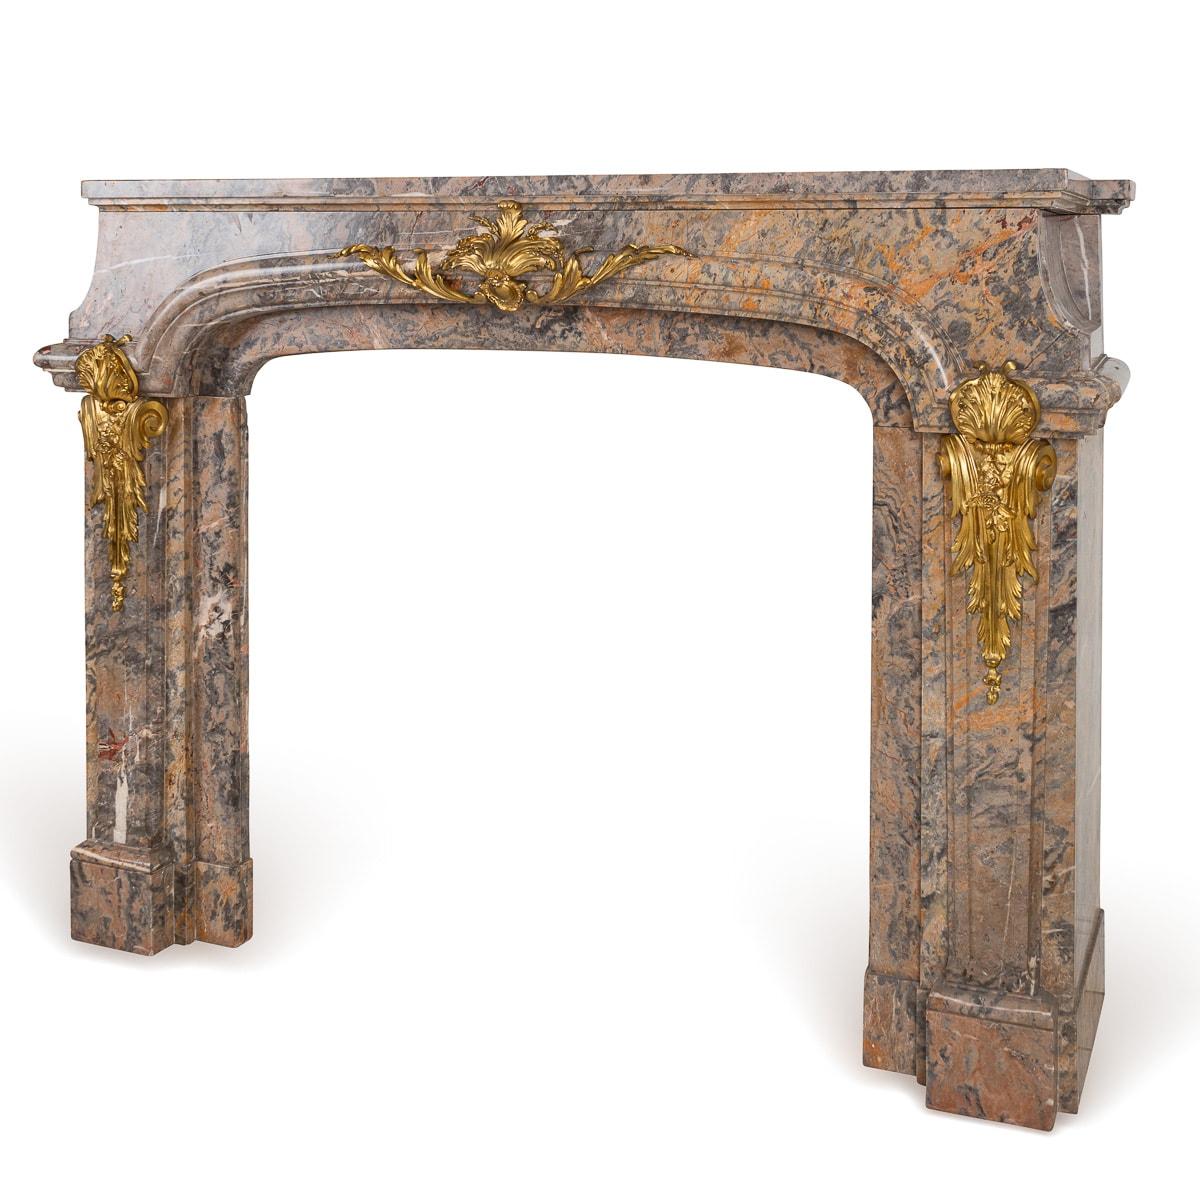 Other Antique 19th Century French Ormolu Mounted Caravaggio Marble Fireplace c.1880 For Sale